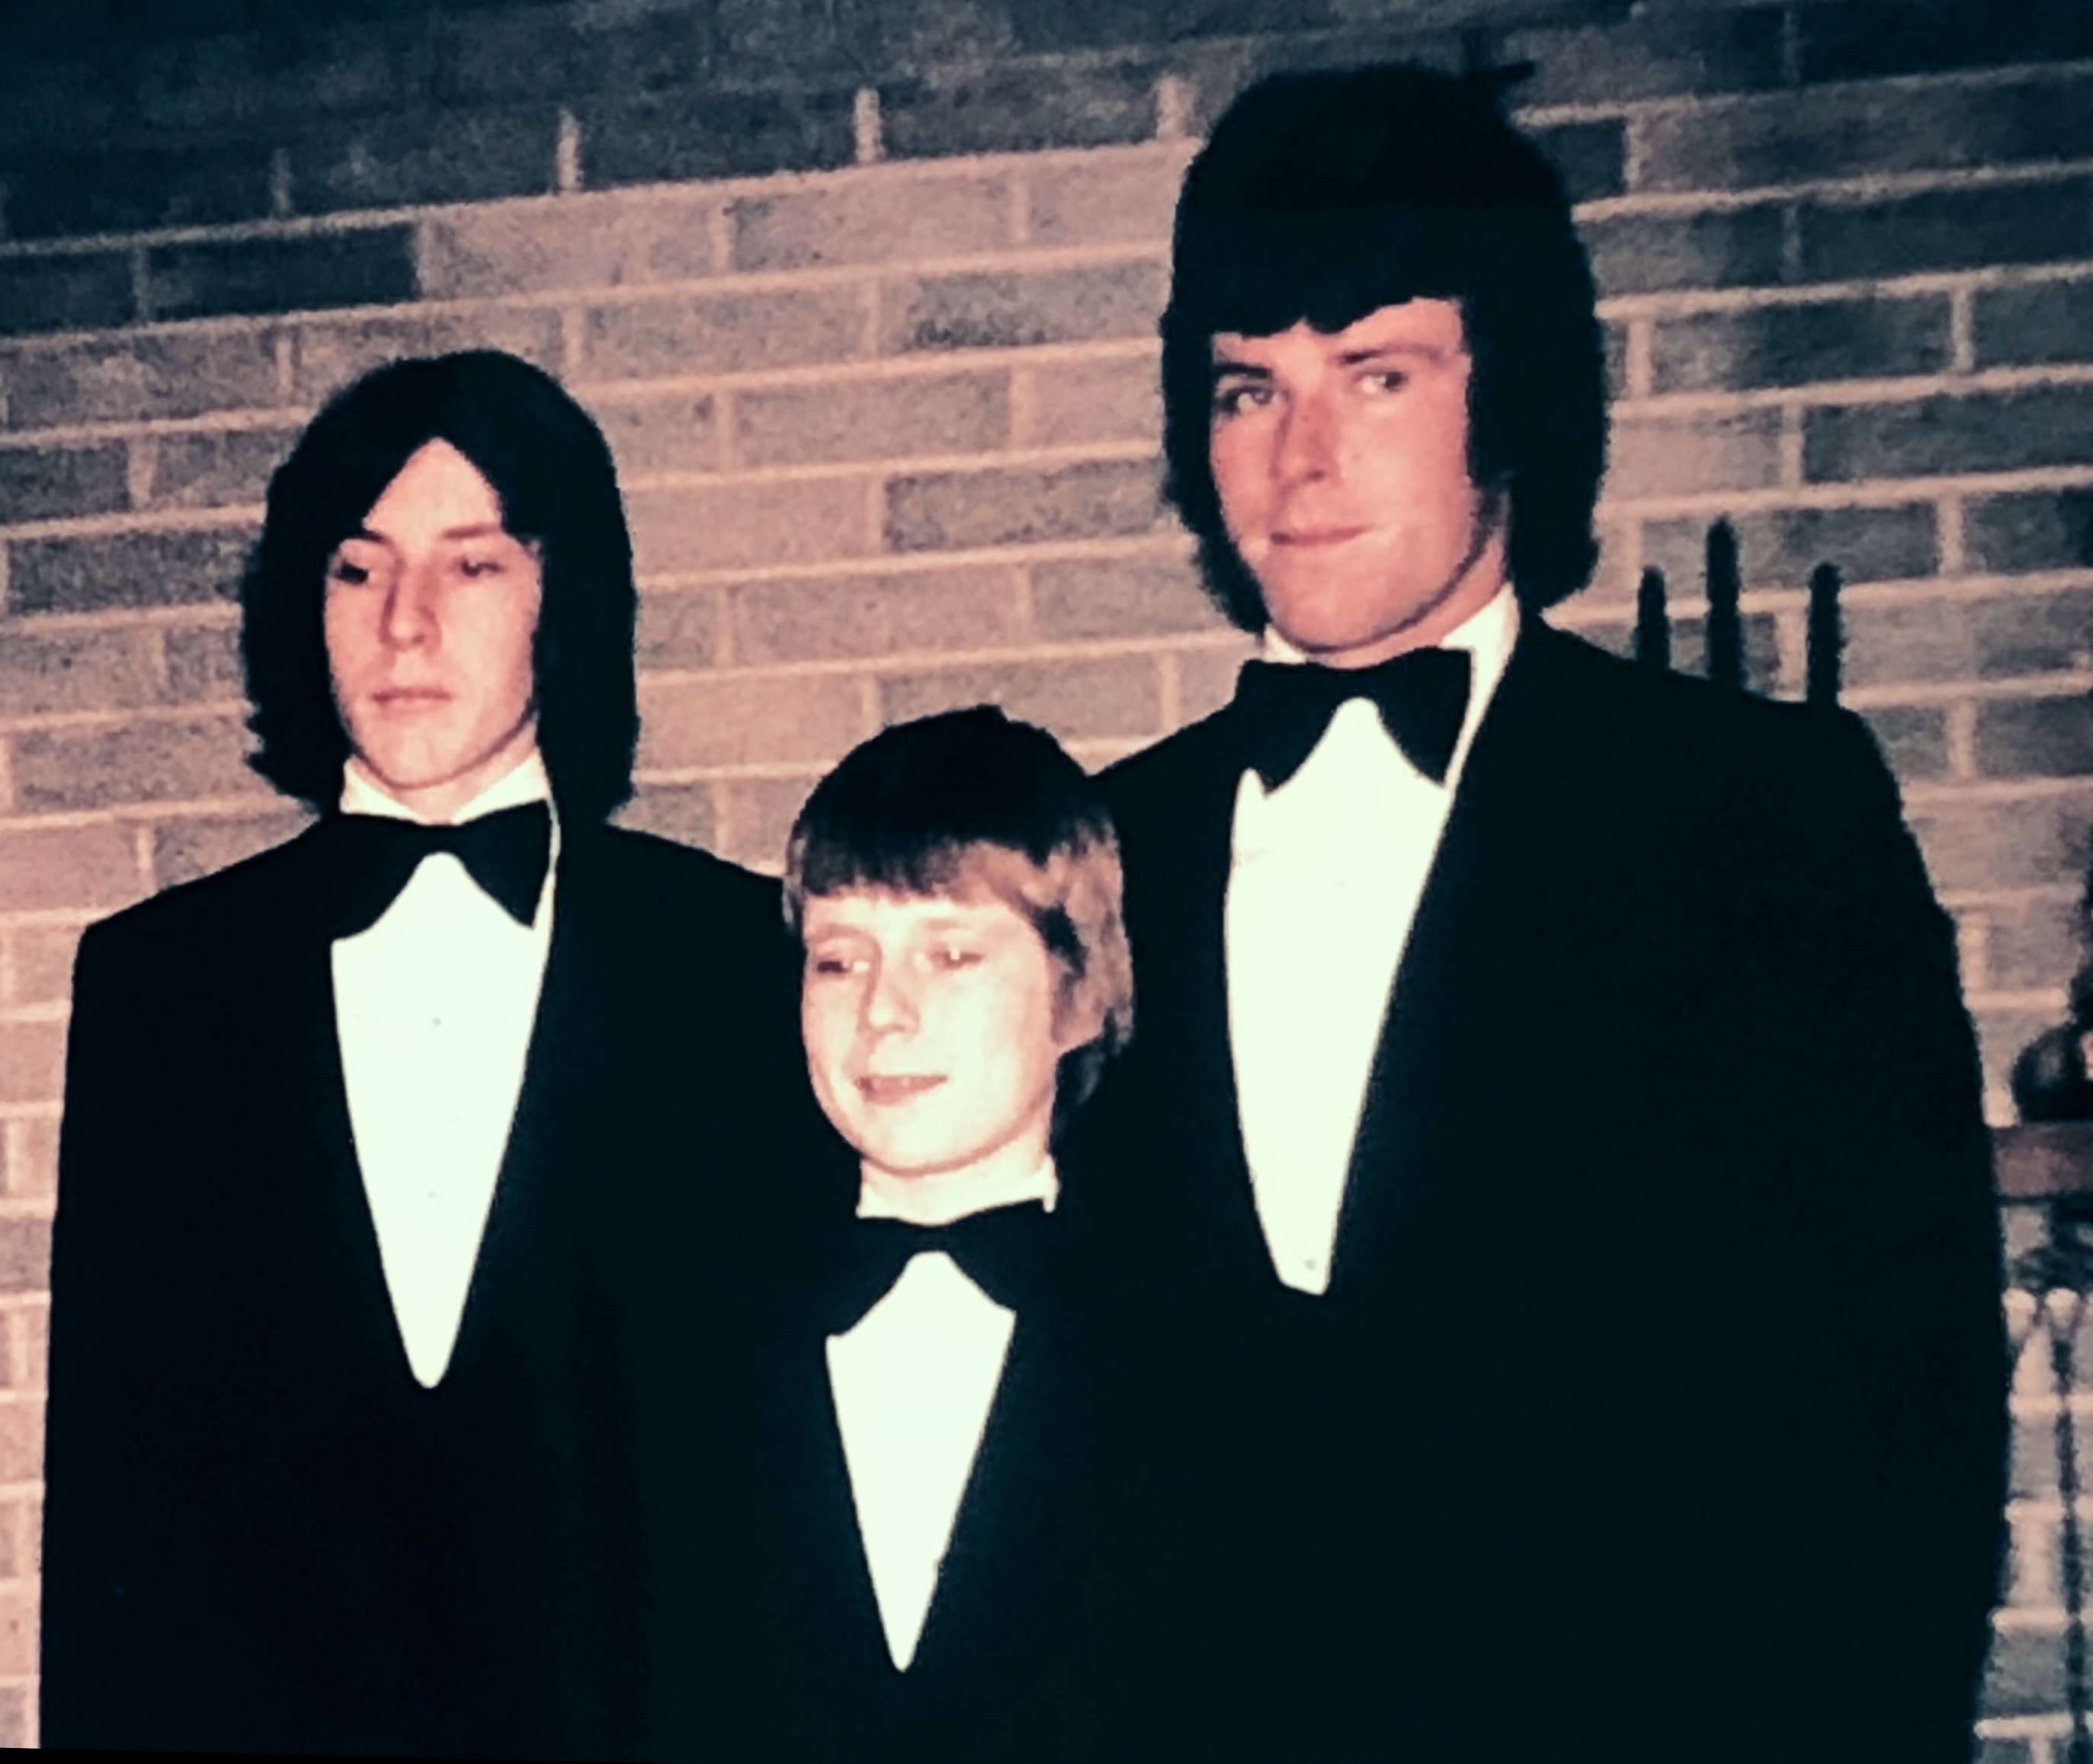 Martin, Andrew and Jay were members of Pete and Kathy’s wedding party - December 22, 1973. I am not sure they wanted to be in this photo. Martin says Jay was holding him up and Andrew said he wasn’t sure what was ‘up’ with the hair.